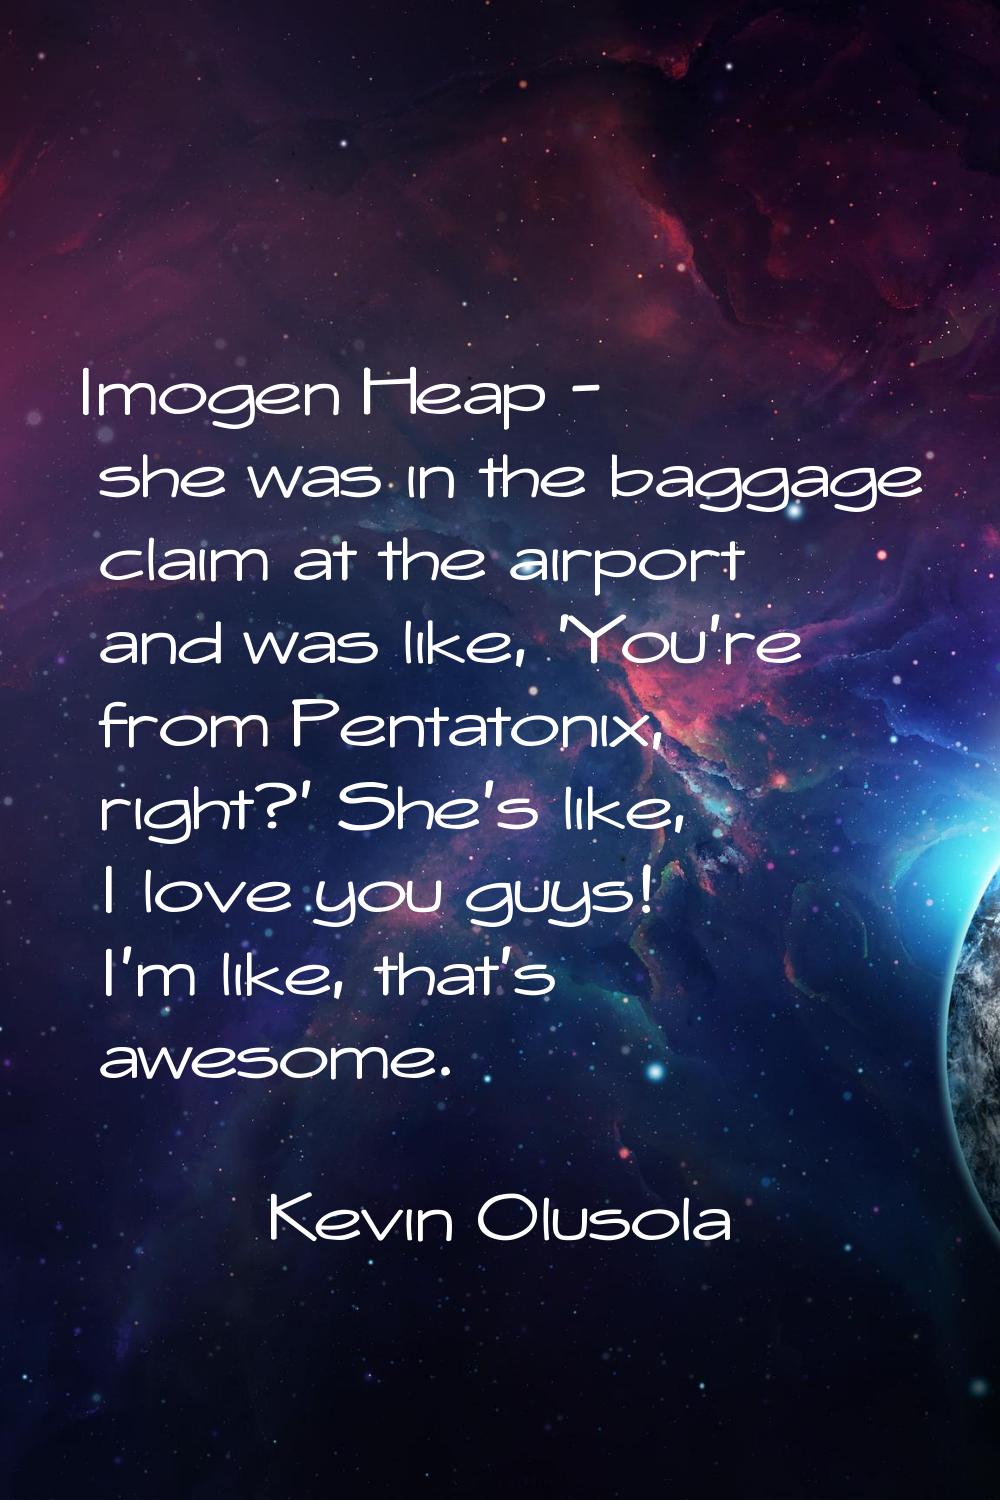 Imogen Heap - she was in the baggage claim at the airport and was like, 'You're from Pentatonix, ri